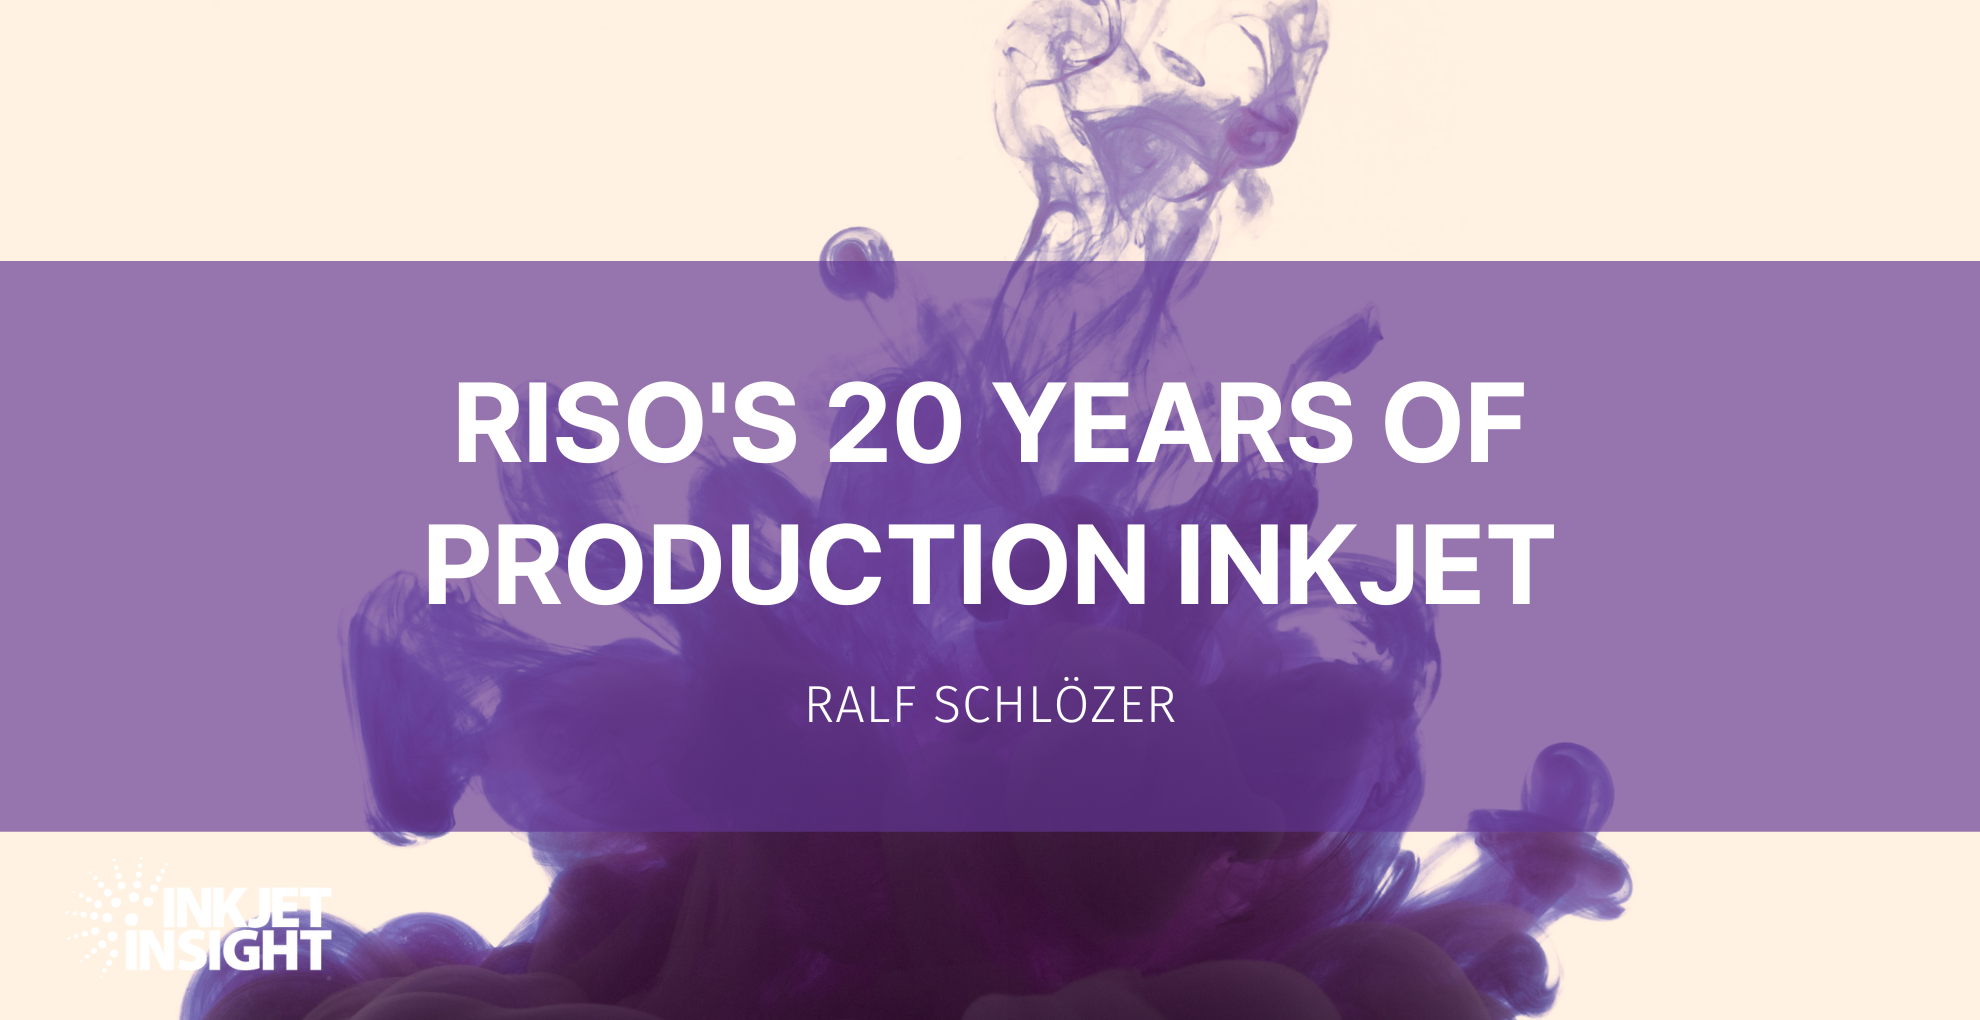 Featured image for “RISO’s 20 Years of Production Inkjet”